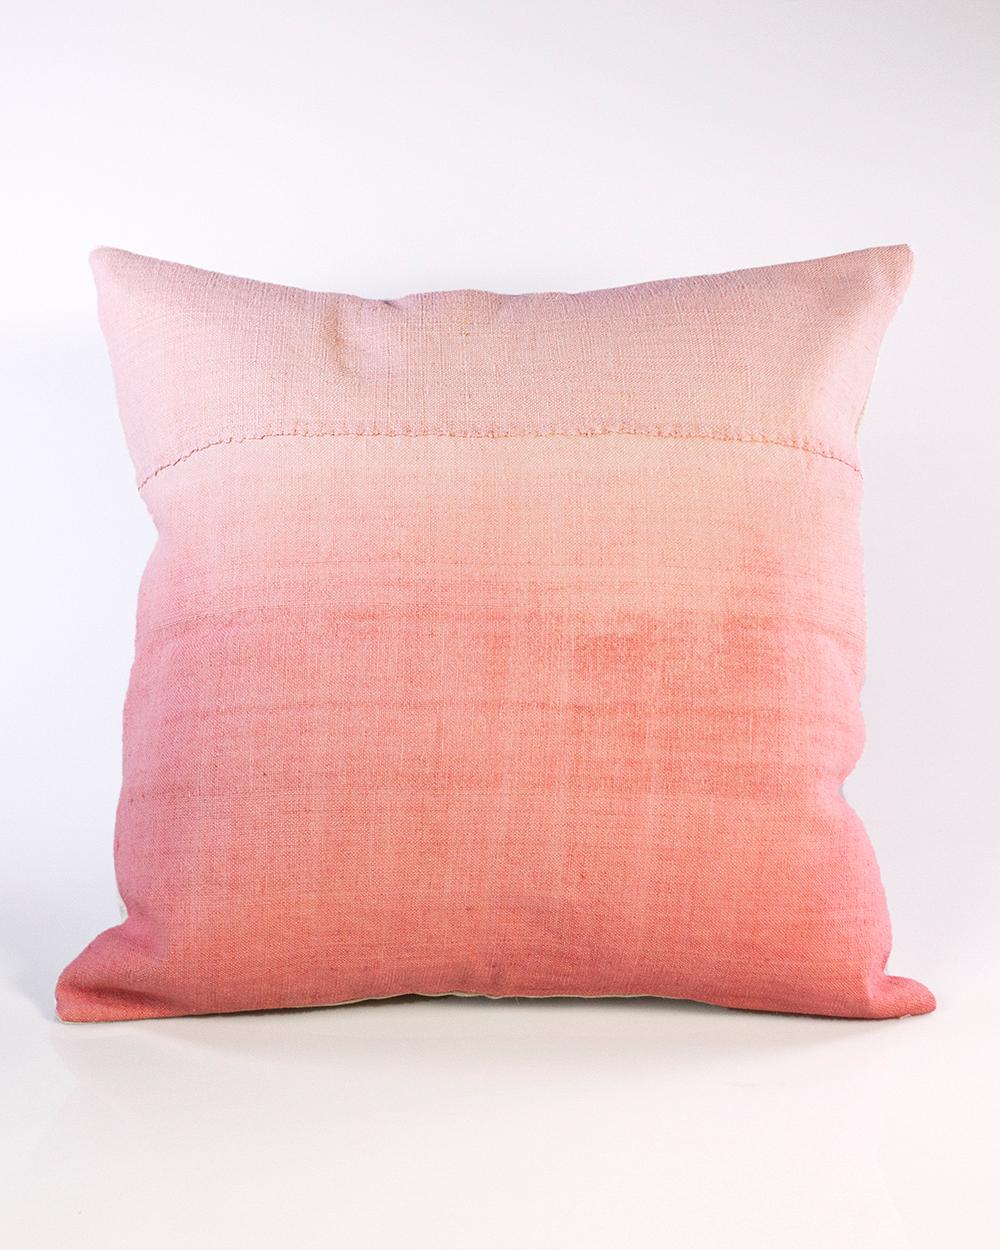 Hand-Crafted Espanyolet Pink Ombre Hand-Painted Vintage Linen Pillow 20